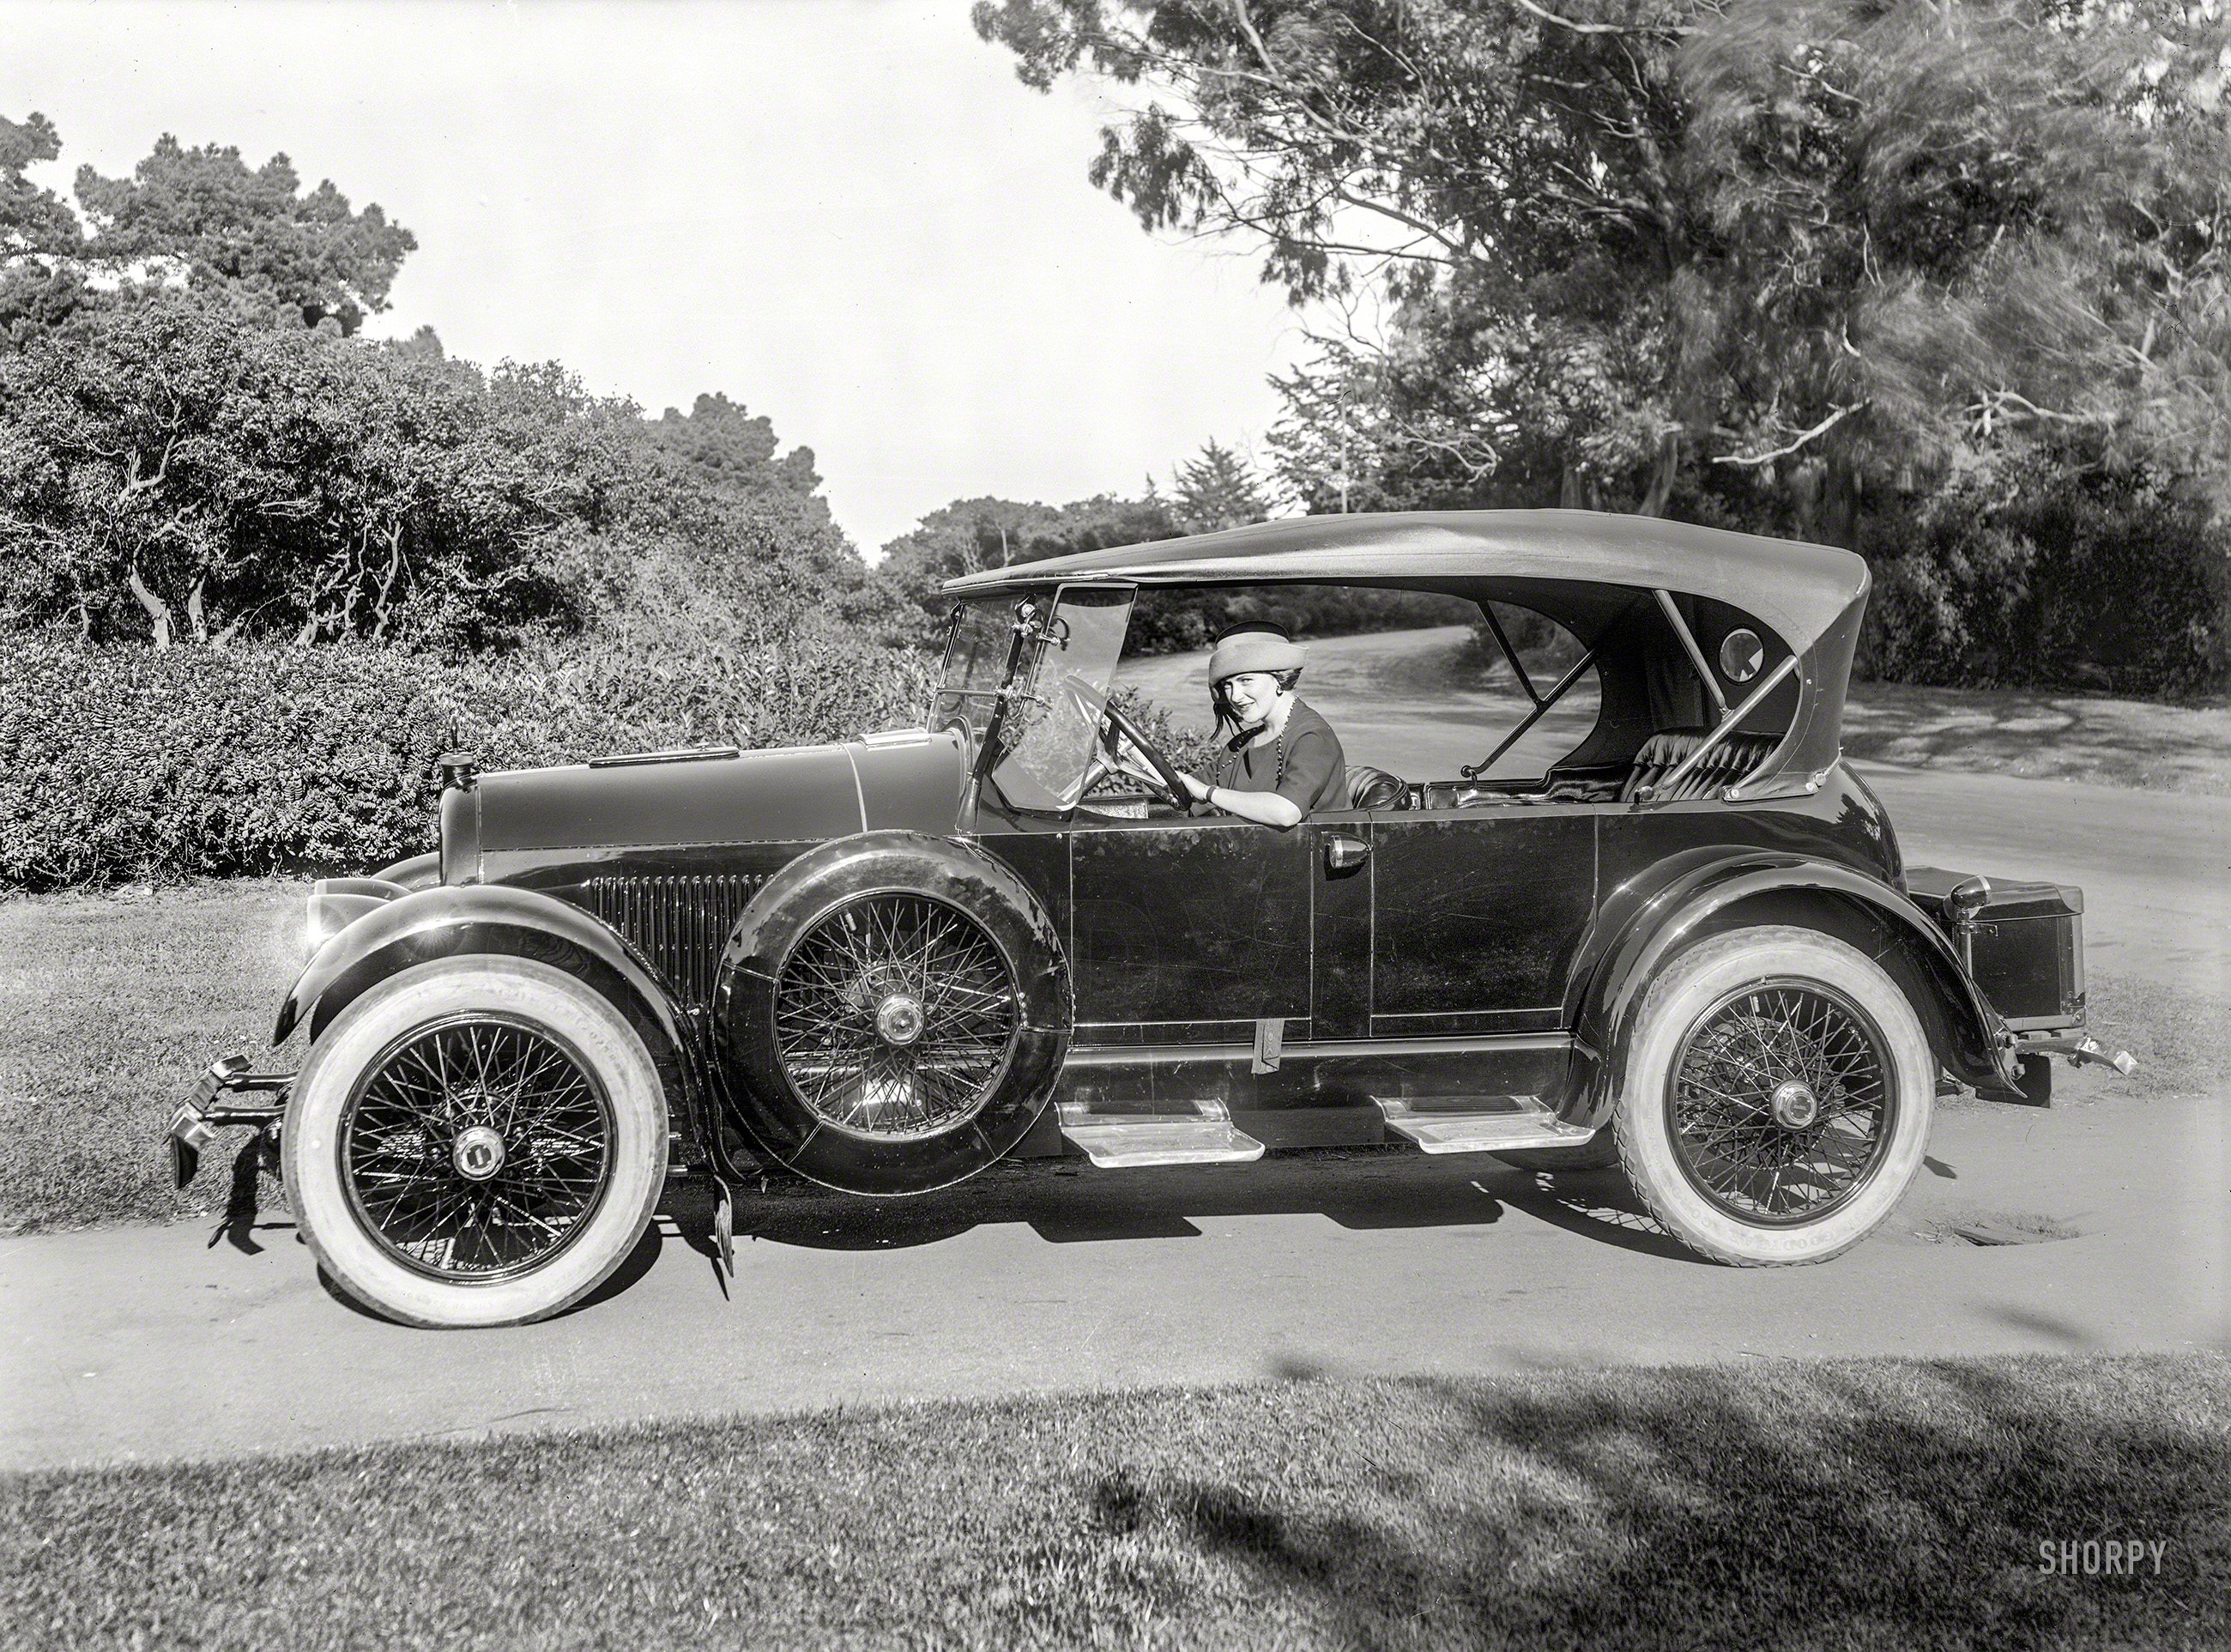 San Francisco circa 1922. "Kissel Tourster at Golden Gate Park." The driver evidently an understudy for Isadora Duncan. 5x7 glass negative. View full size.